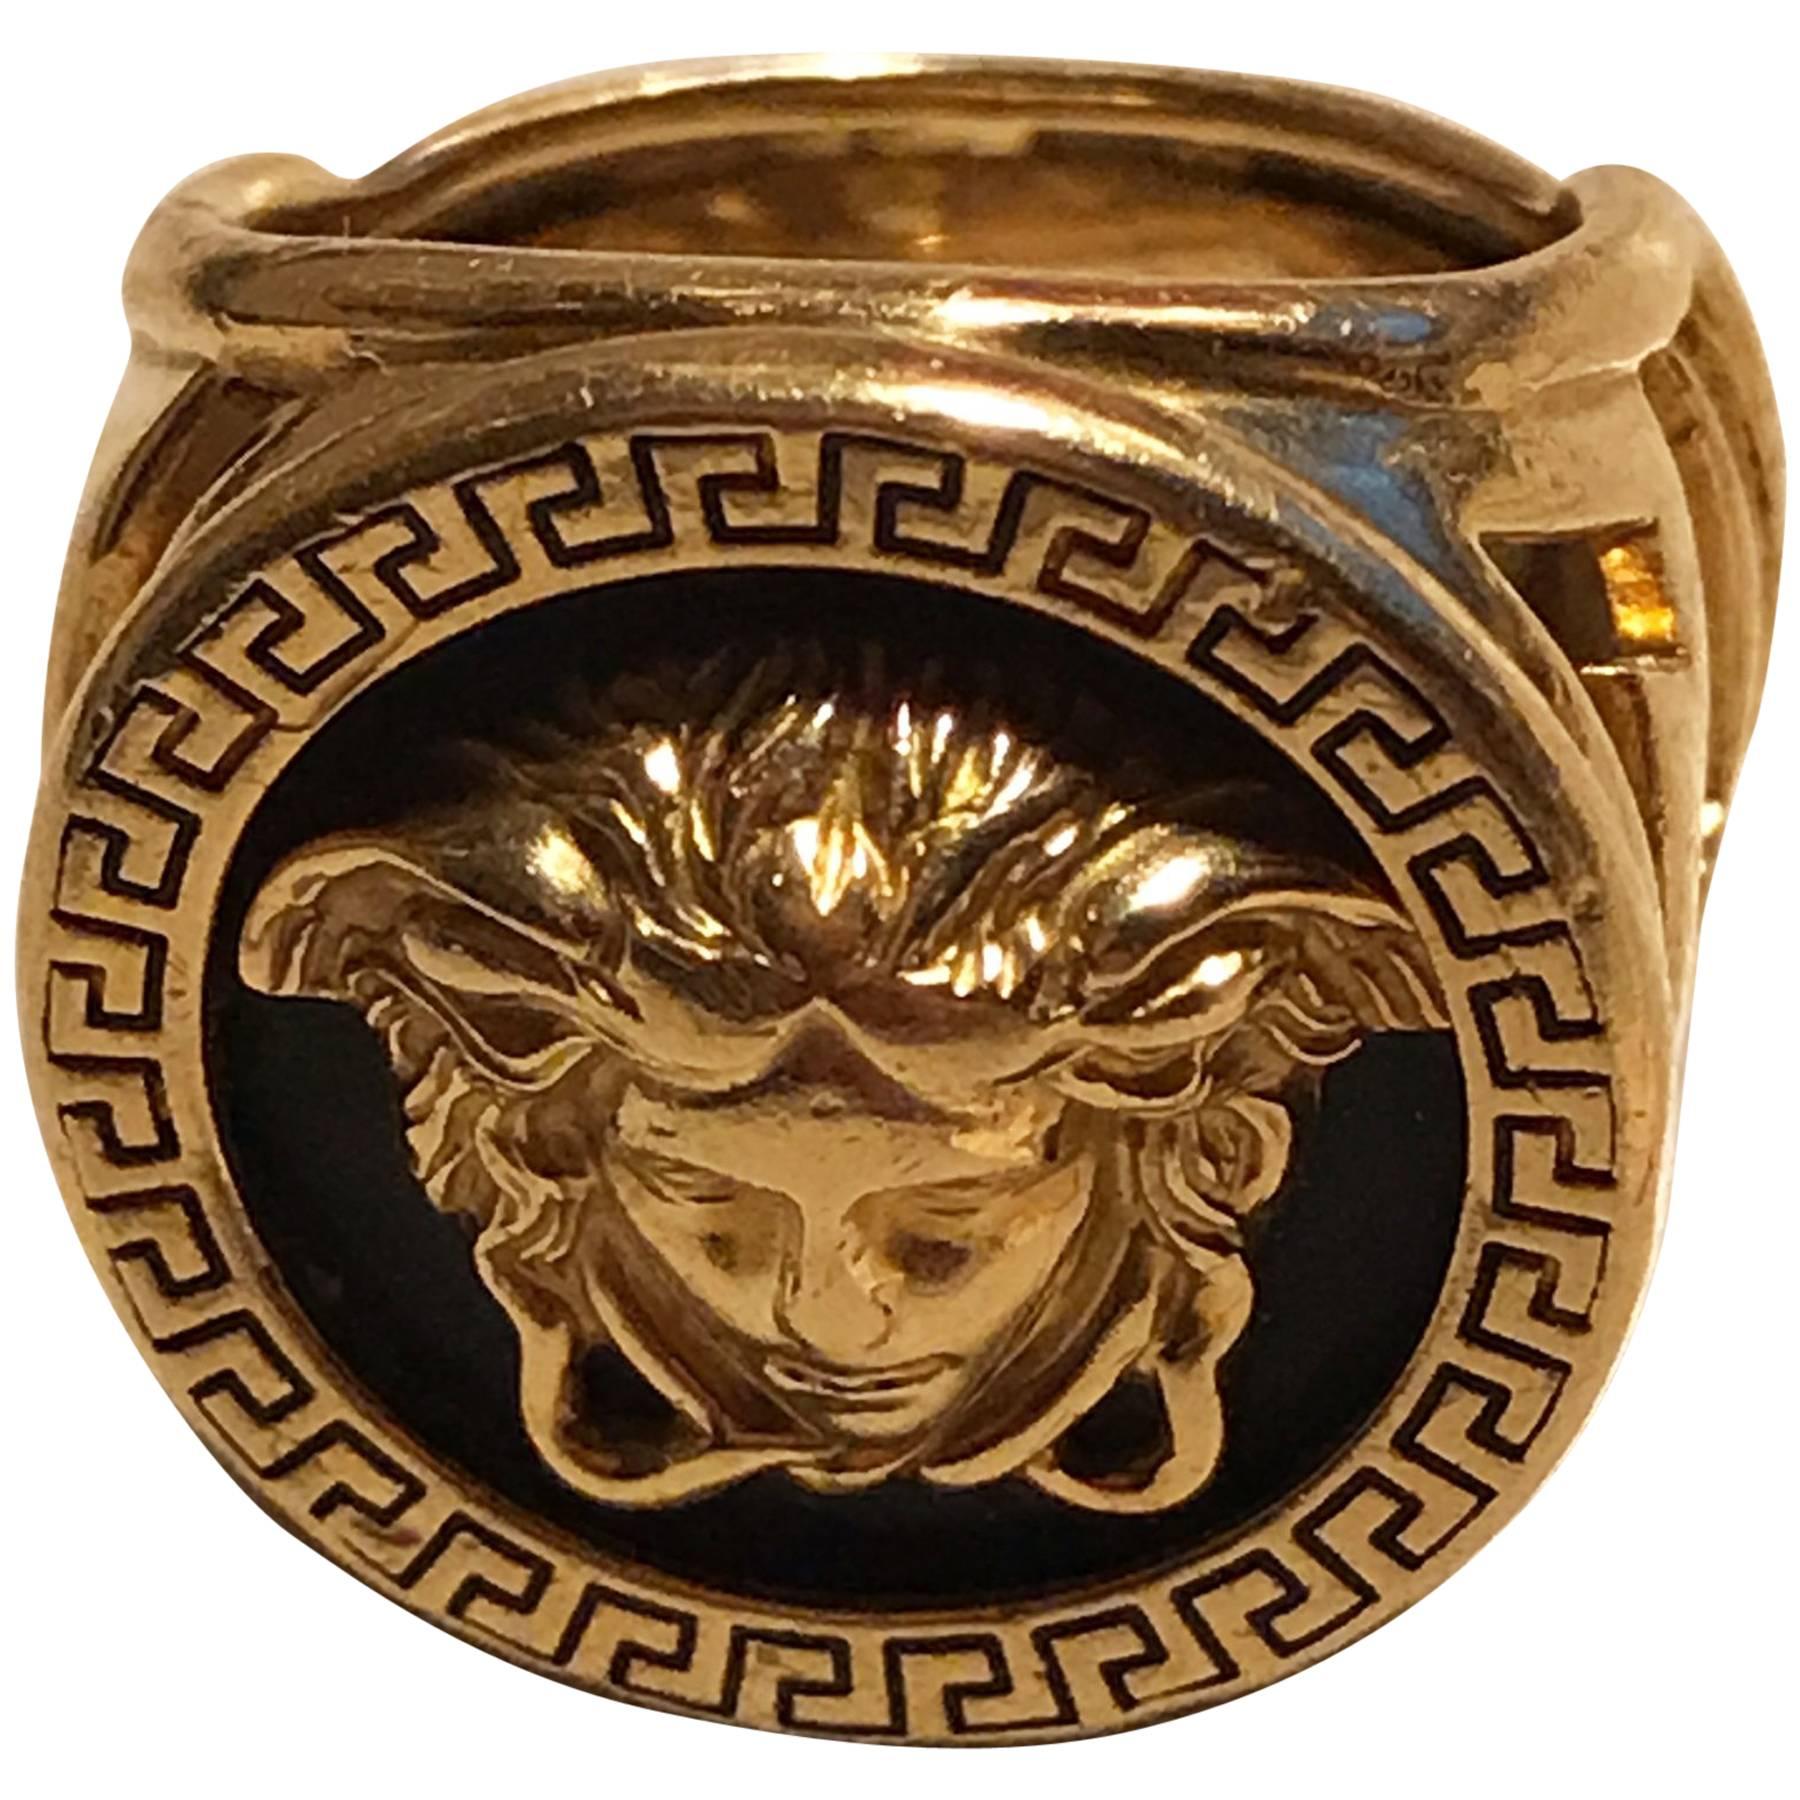 Vintage Gianni Versace Medusa Head Ring Made in Italy - Ruby Lane